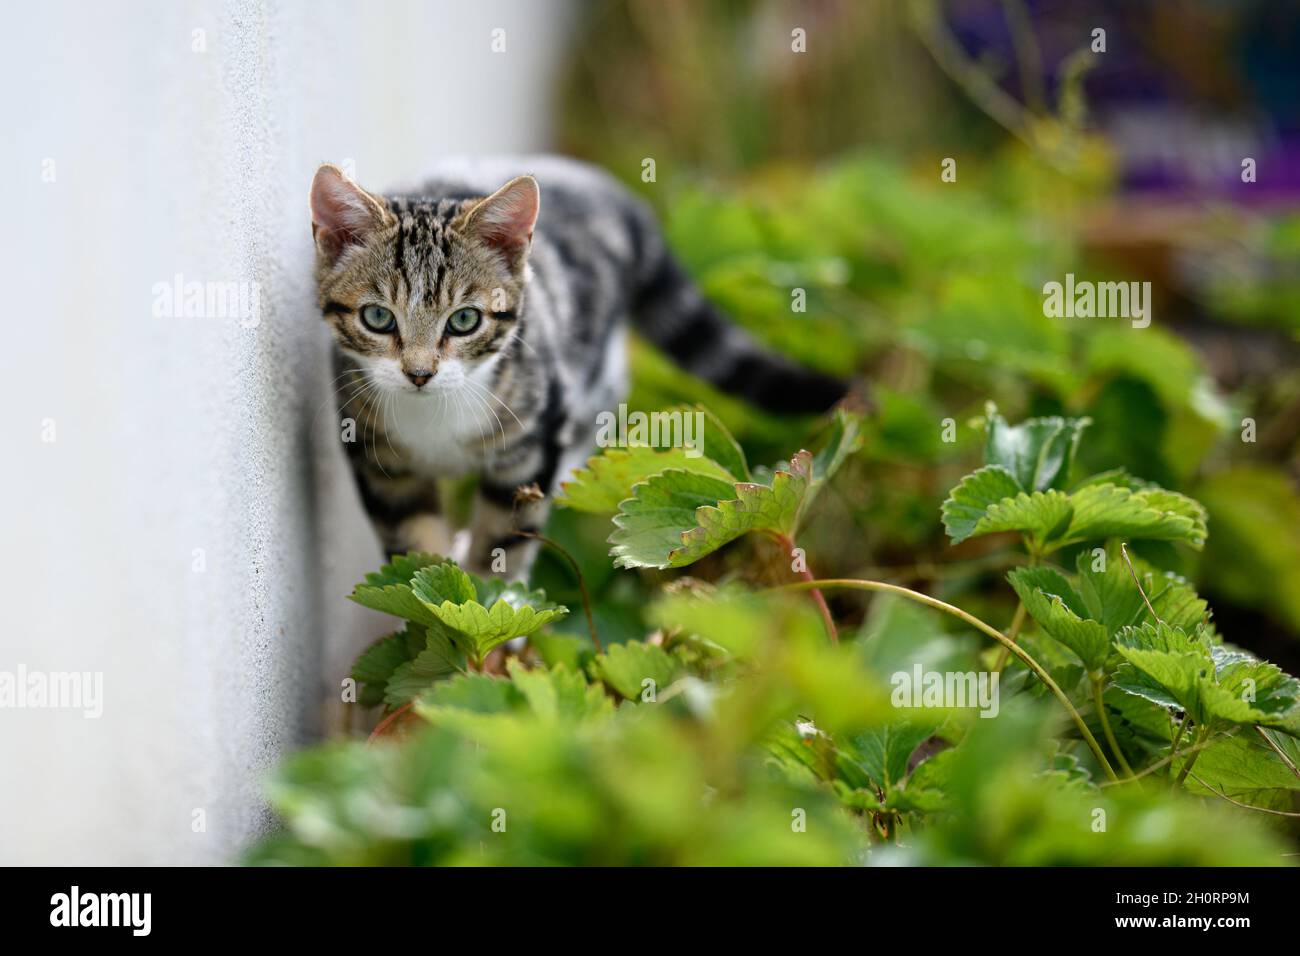 Tabby cat prowling through undergrowth in a garden, Ireland Stock Photo